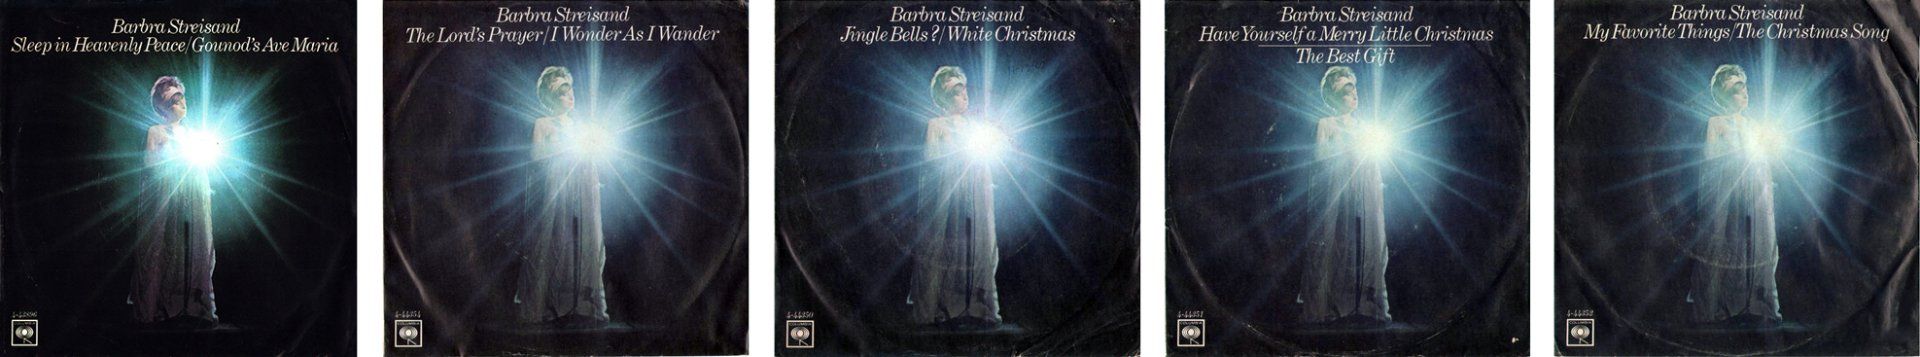 Five Christmas singles by Barbra Streisand issued by Columbia Records in 1967